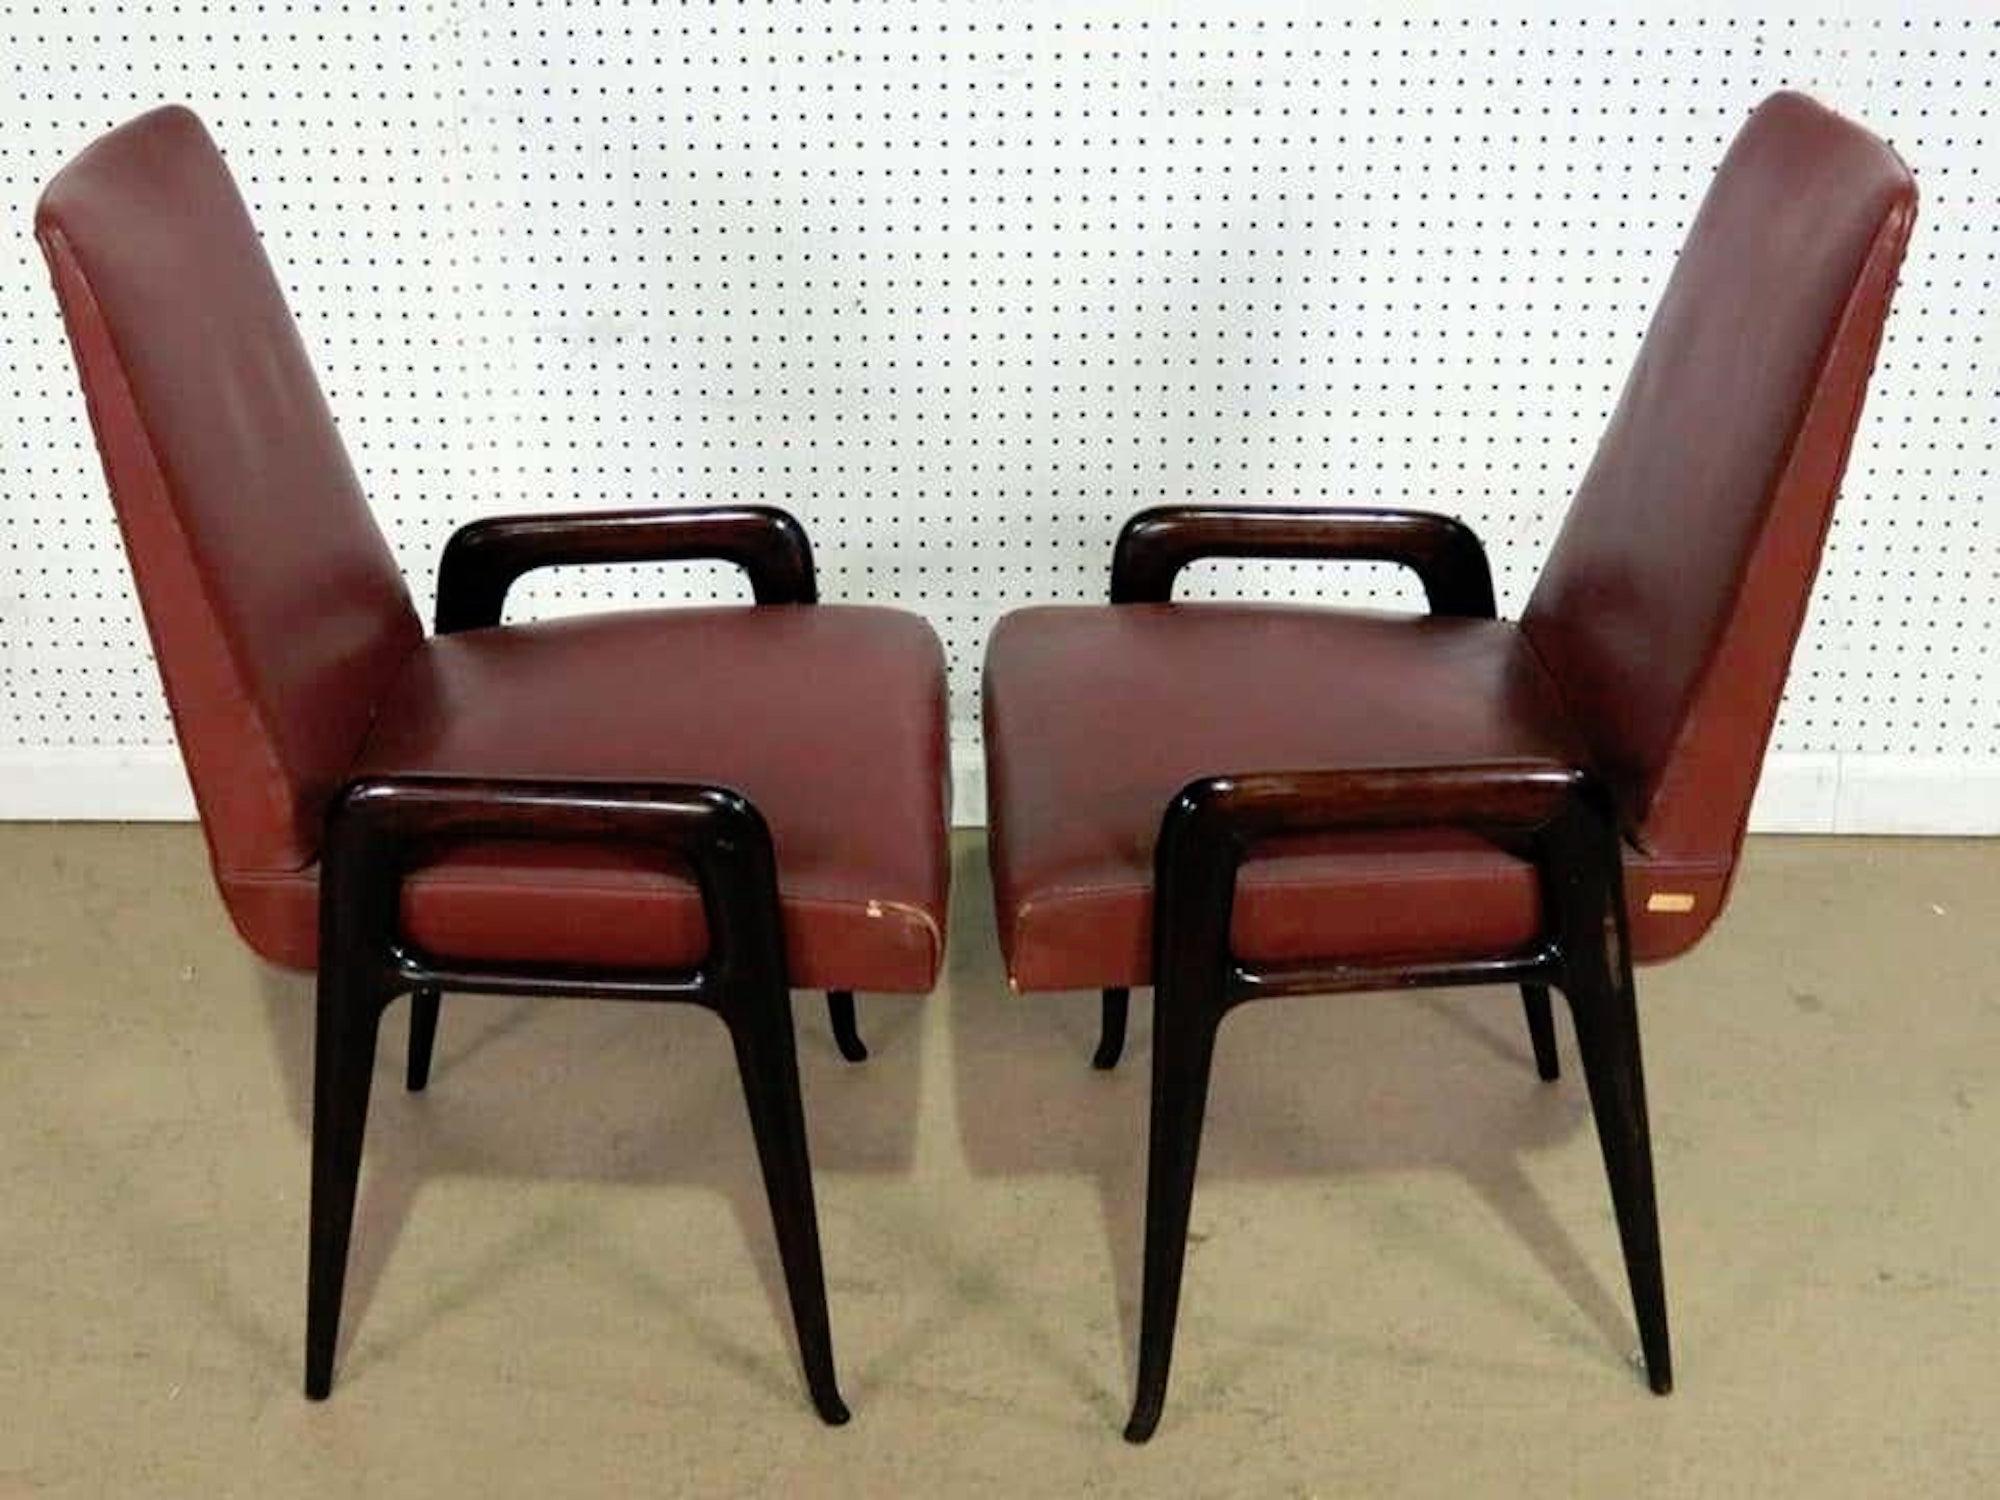 Pair of vintage Italian armchairs with rosewood frame and distressed leather with nail head trim.
(Please confirm item location - NY or NJ - with dealer).
 